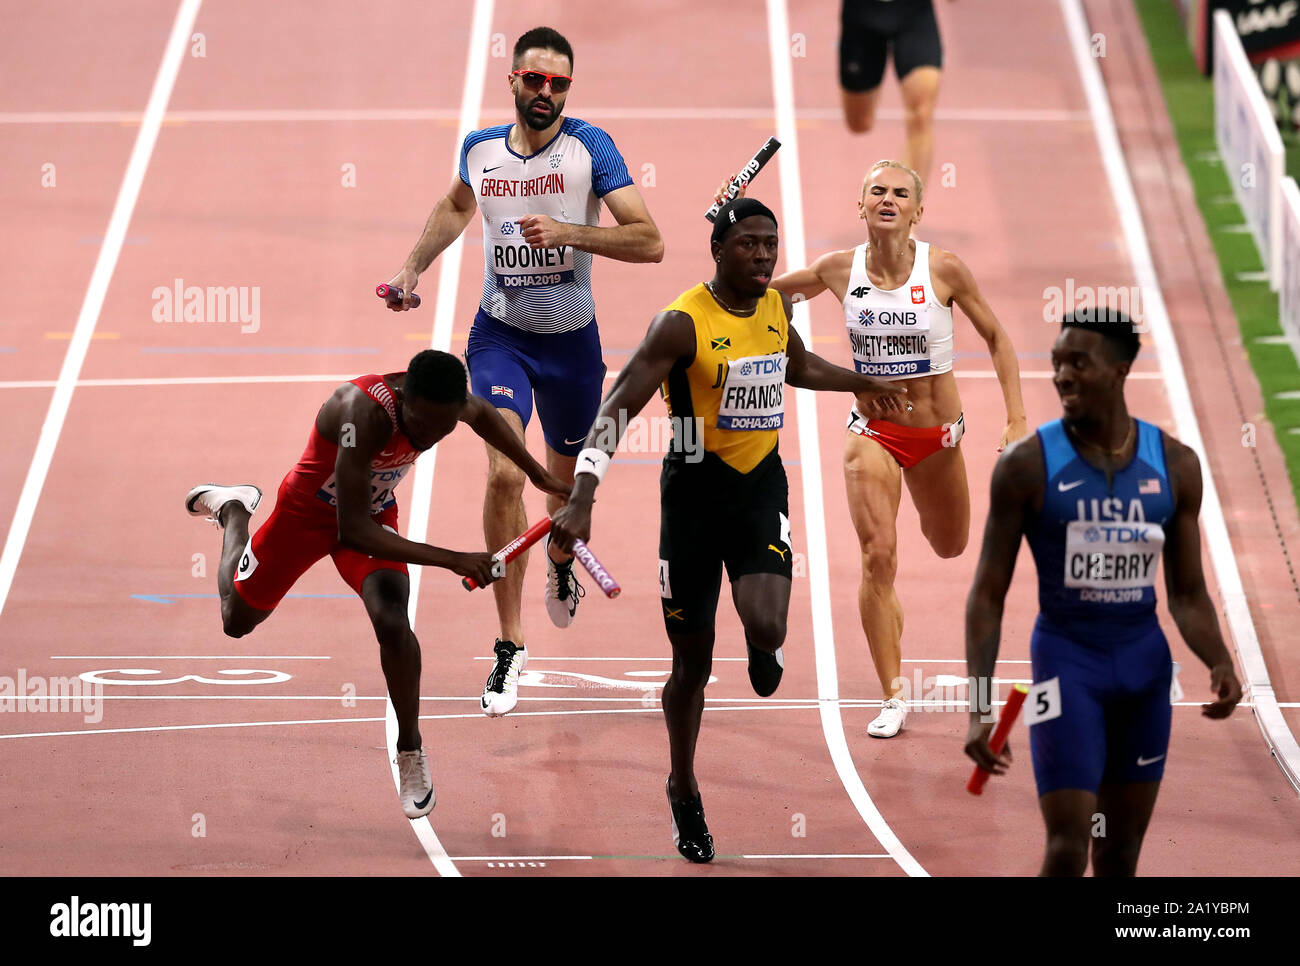 Great Britain’s Martyn Rooney crosses the line to lead home his team to fourth place in the Mixed 4x400m relay during day three of the IAAF World Championships at The Khalifa International Stadium, Doha, Qatar. Stock Photo